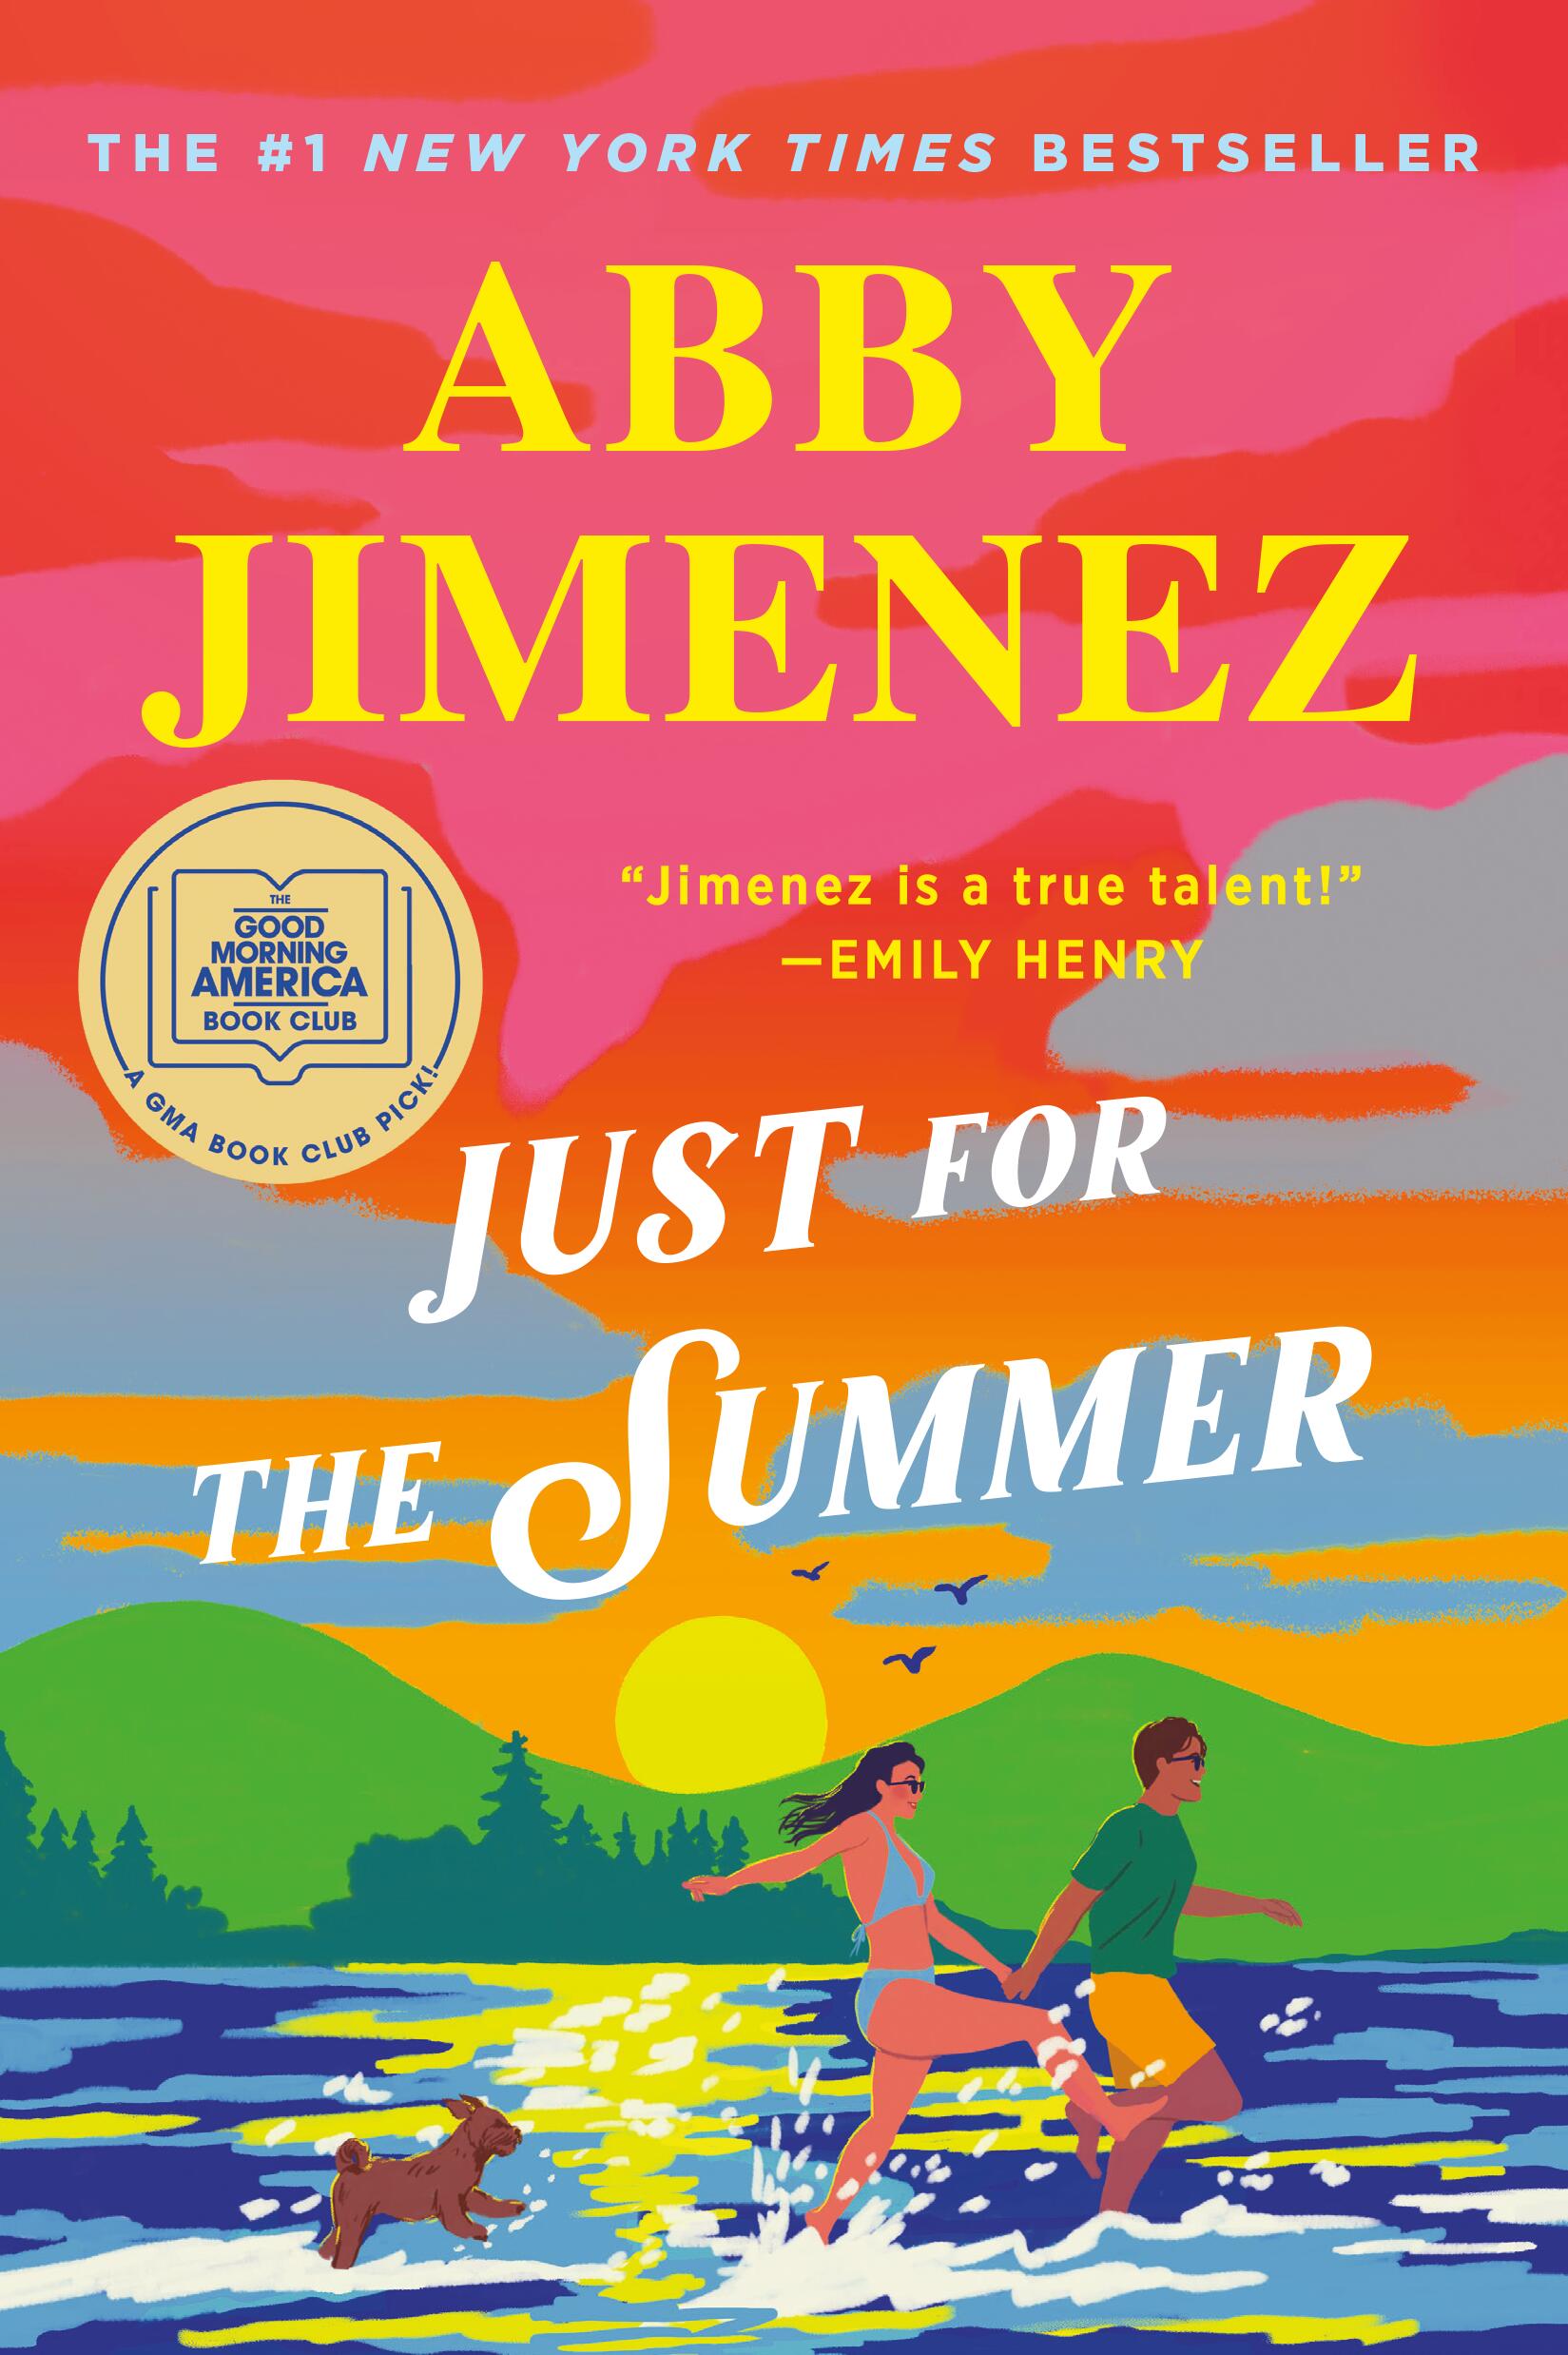 JUST FOR THE SUMMER, by JIMENEZ, ABBY